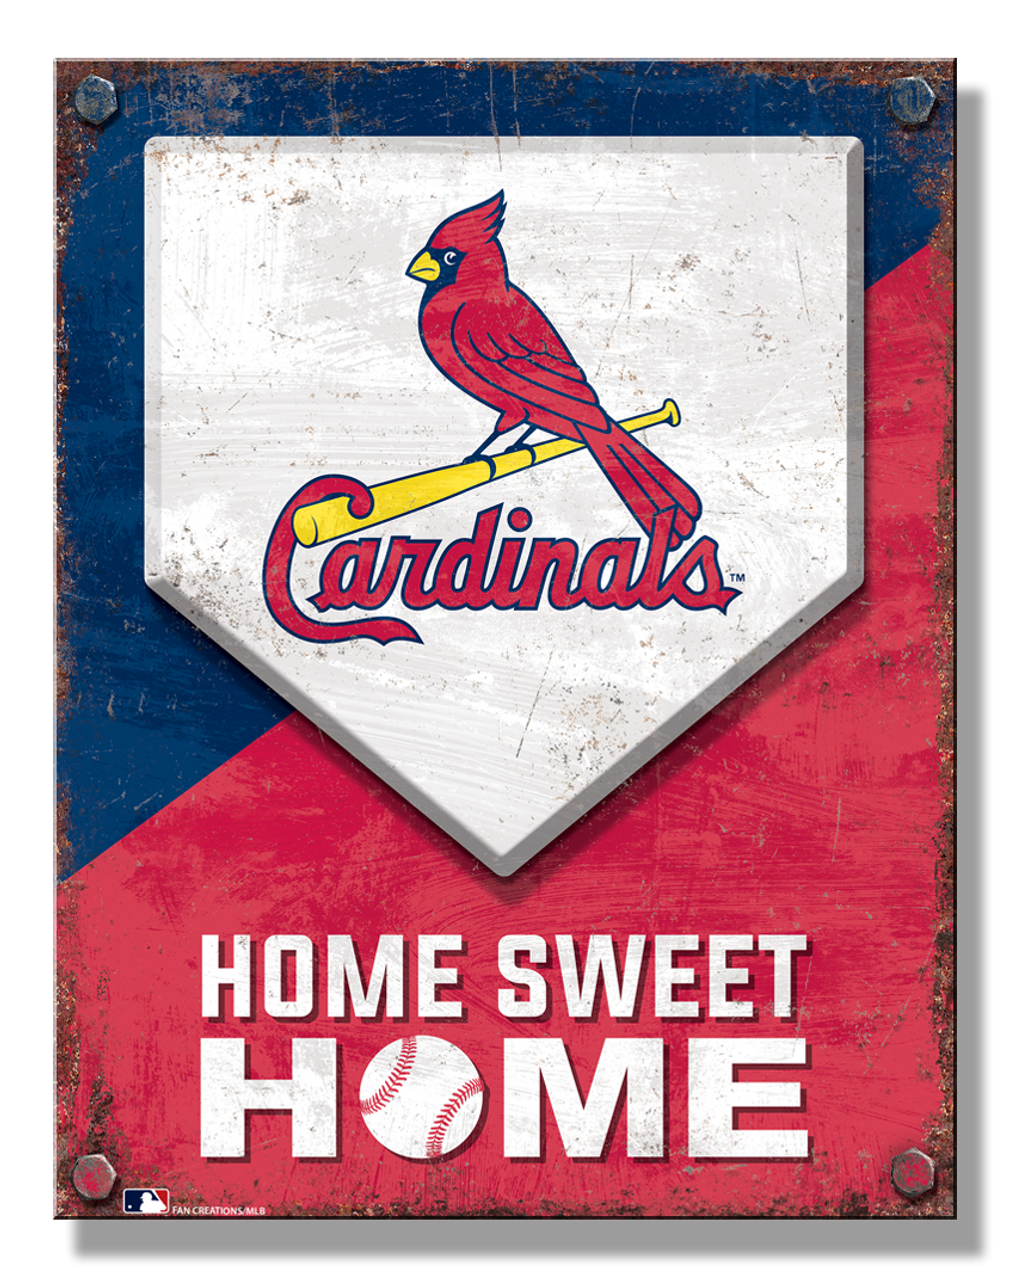 Licensed: MLB St. Louis Cardinals Logo and Team Name on Red by